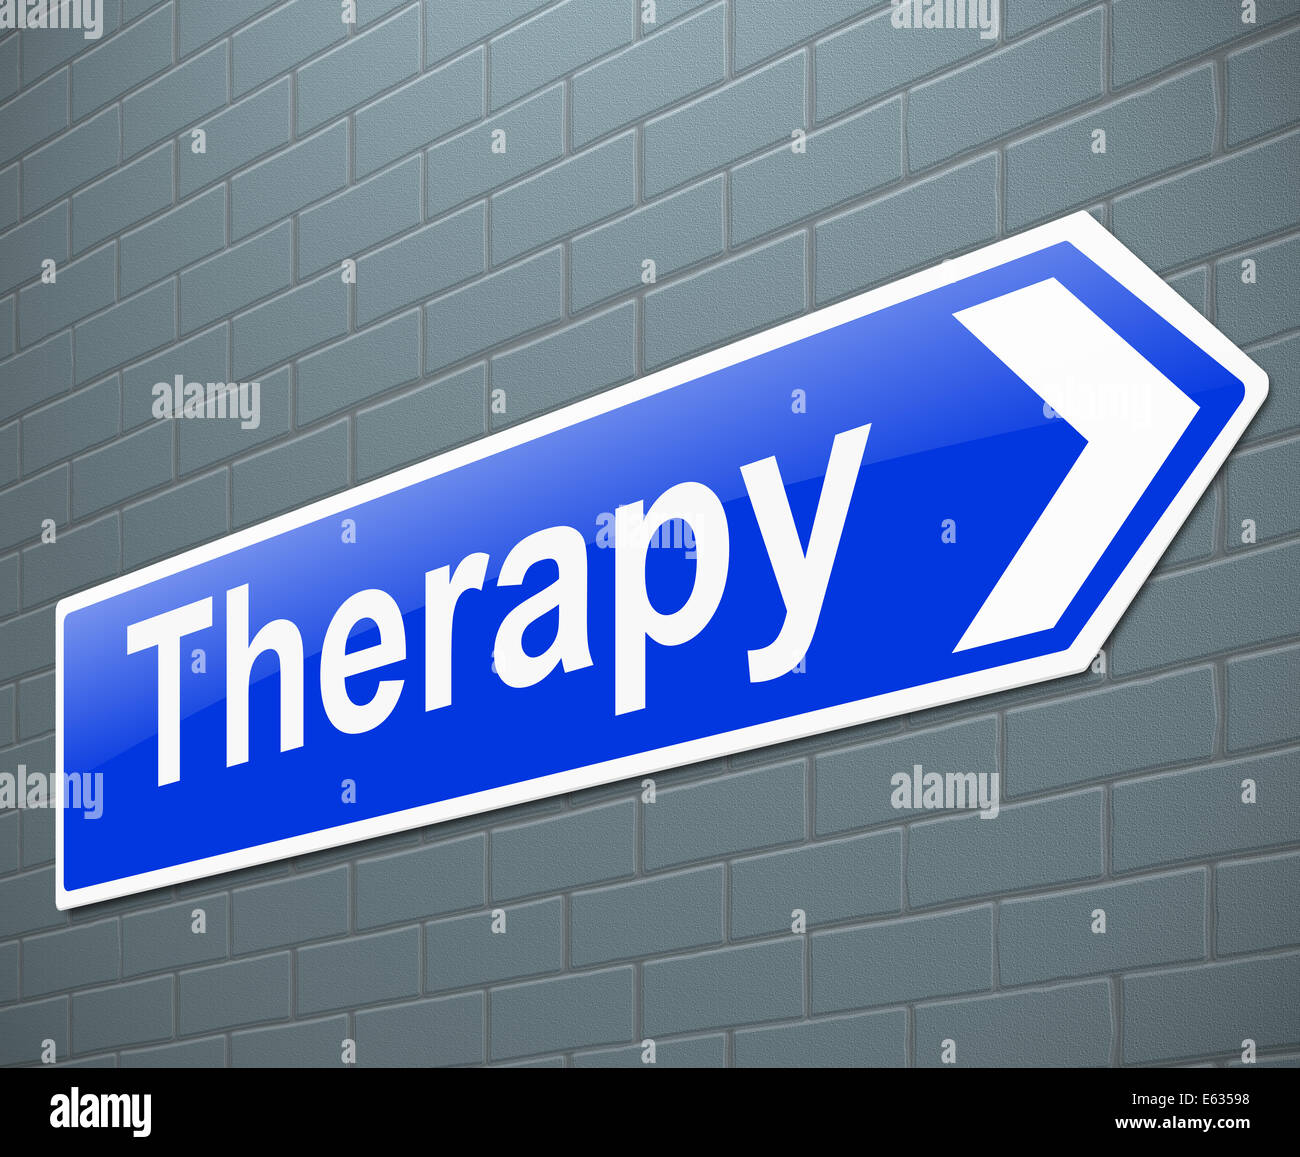 Therapy concept. Stock Photo